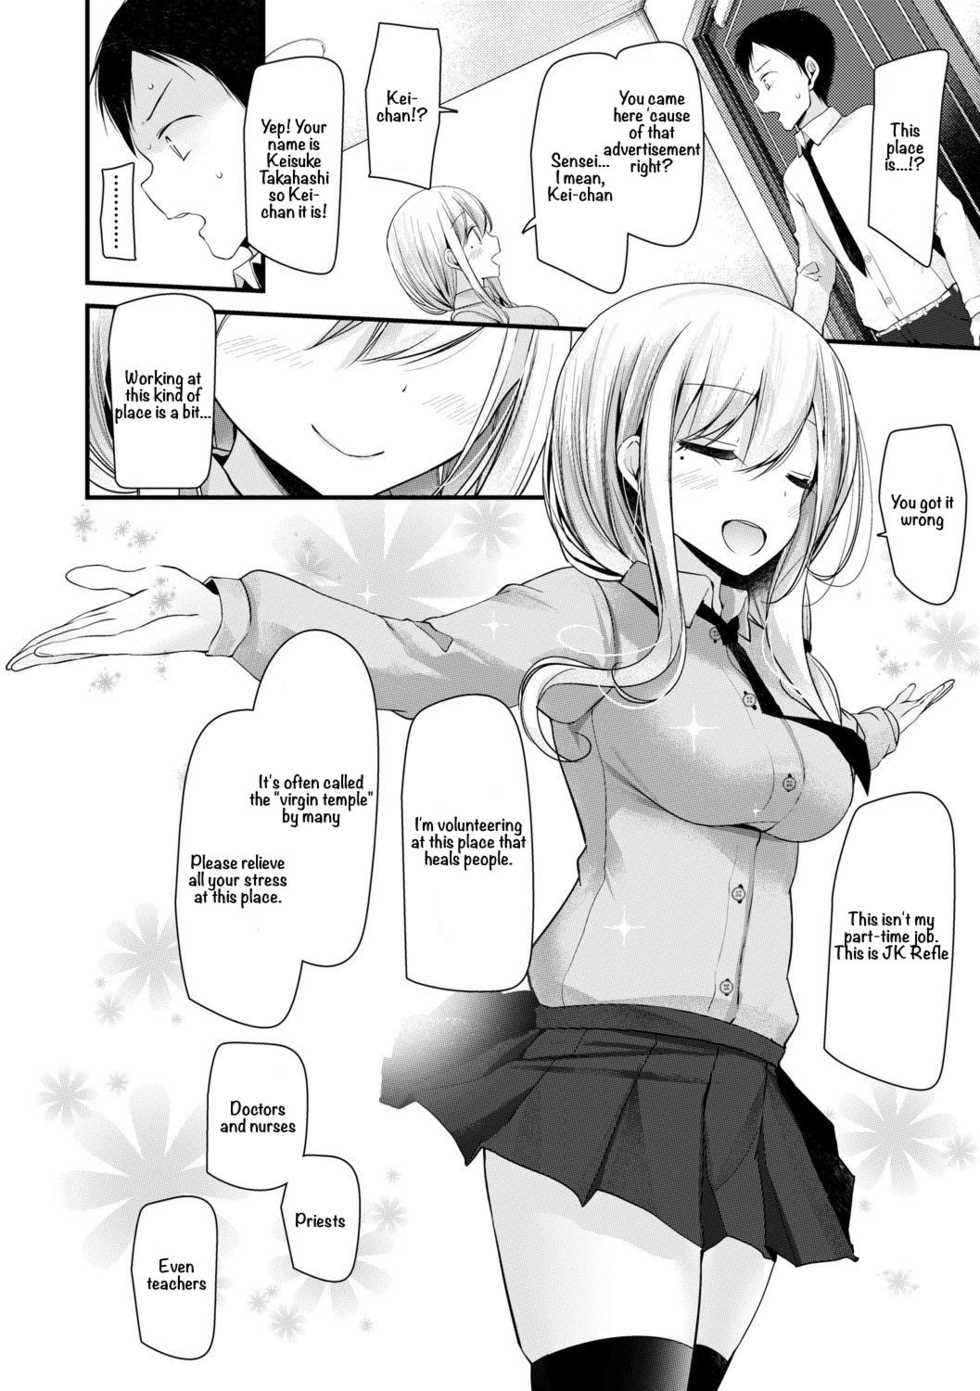 [Oouso] JK-Refre (JK-REFLE) [English] [vay150] - Page 8